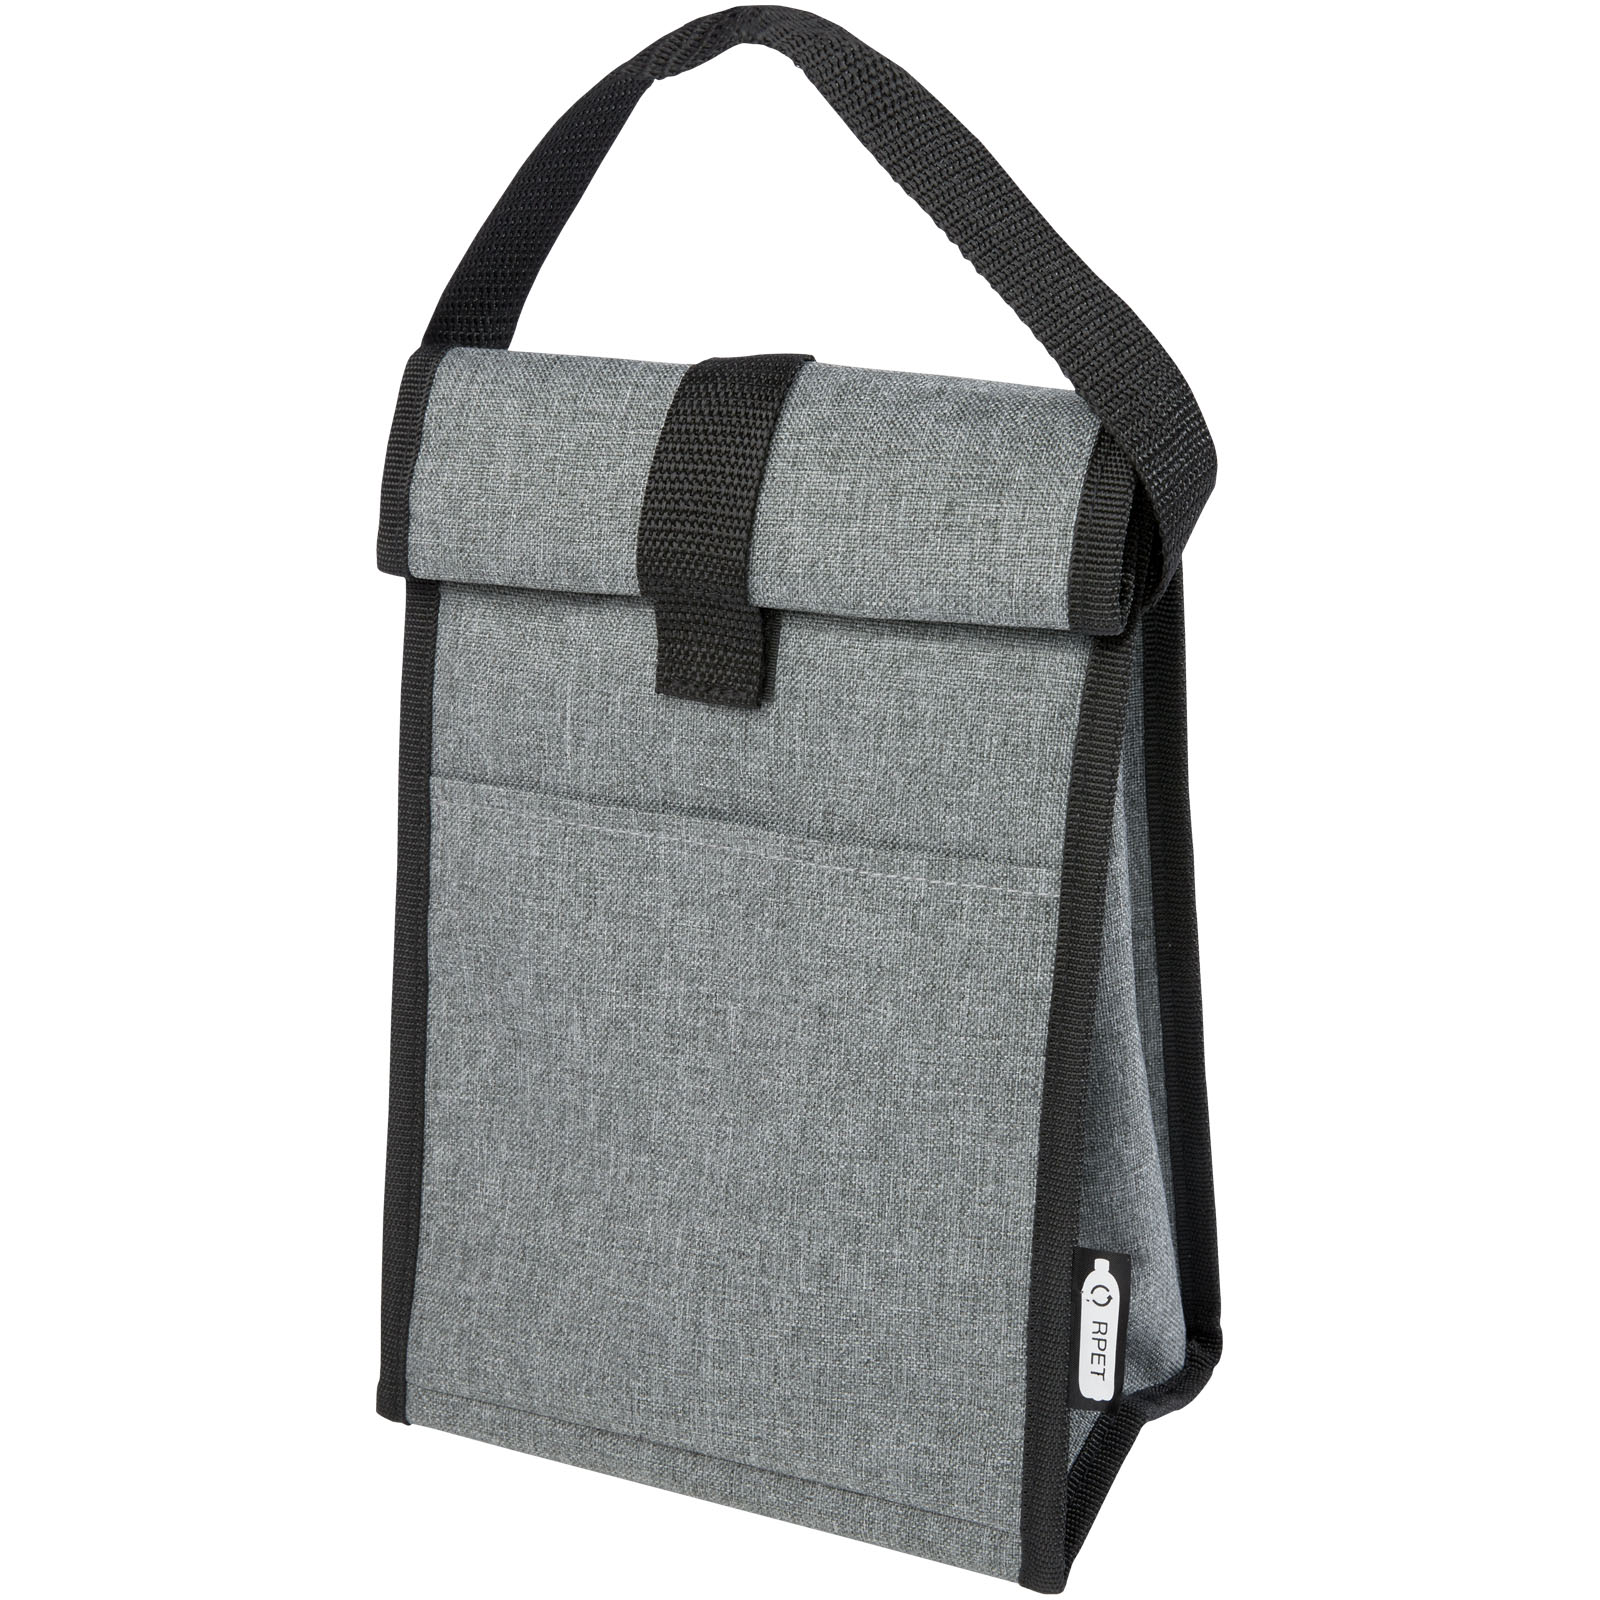 Cooling bag ANNALEE made of recycled material - heather grey